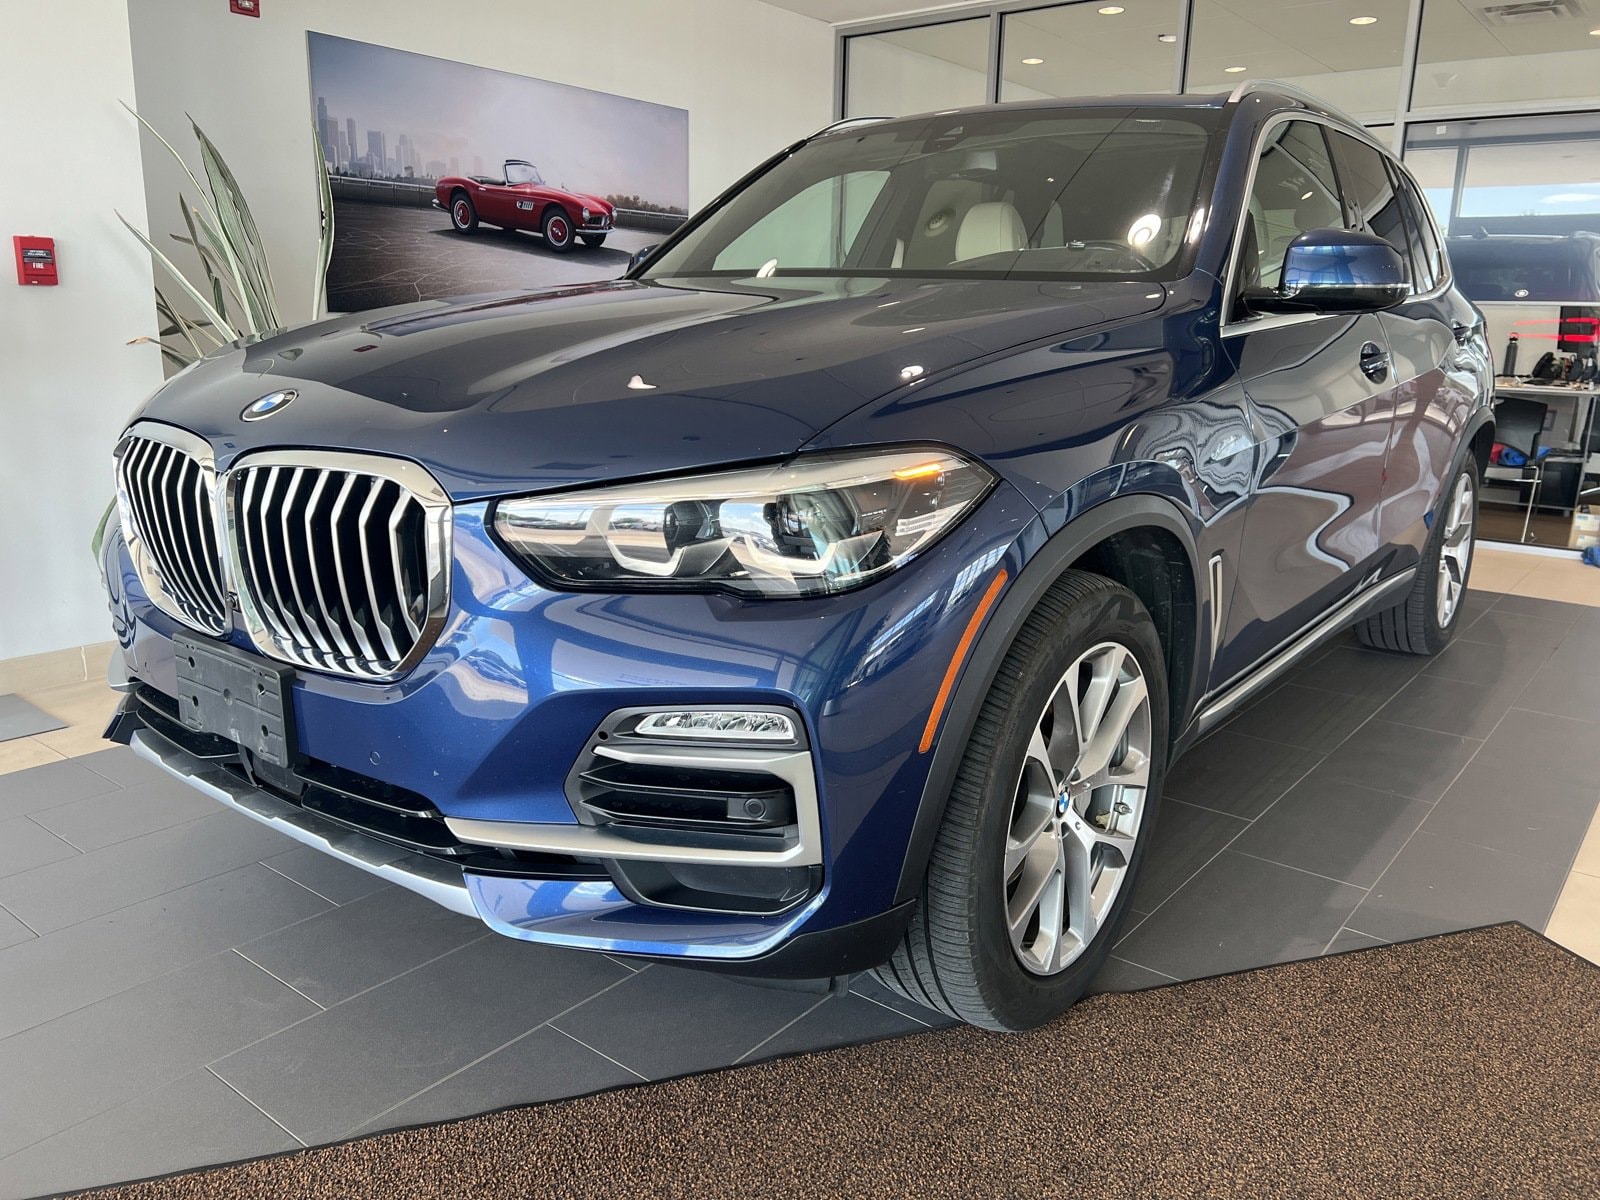 Pre-Owned Featured Vehicles | Burdick BMW